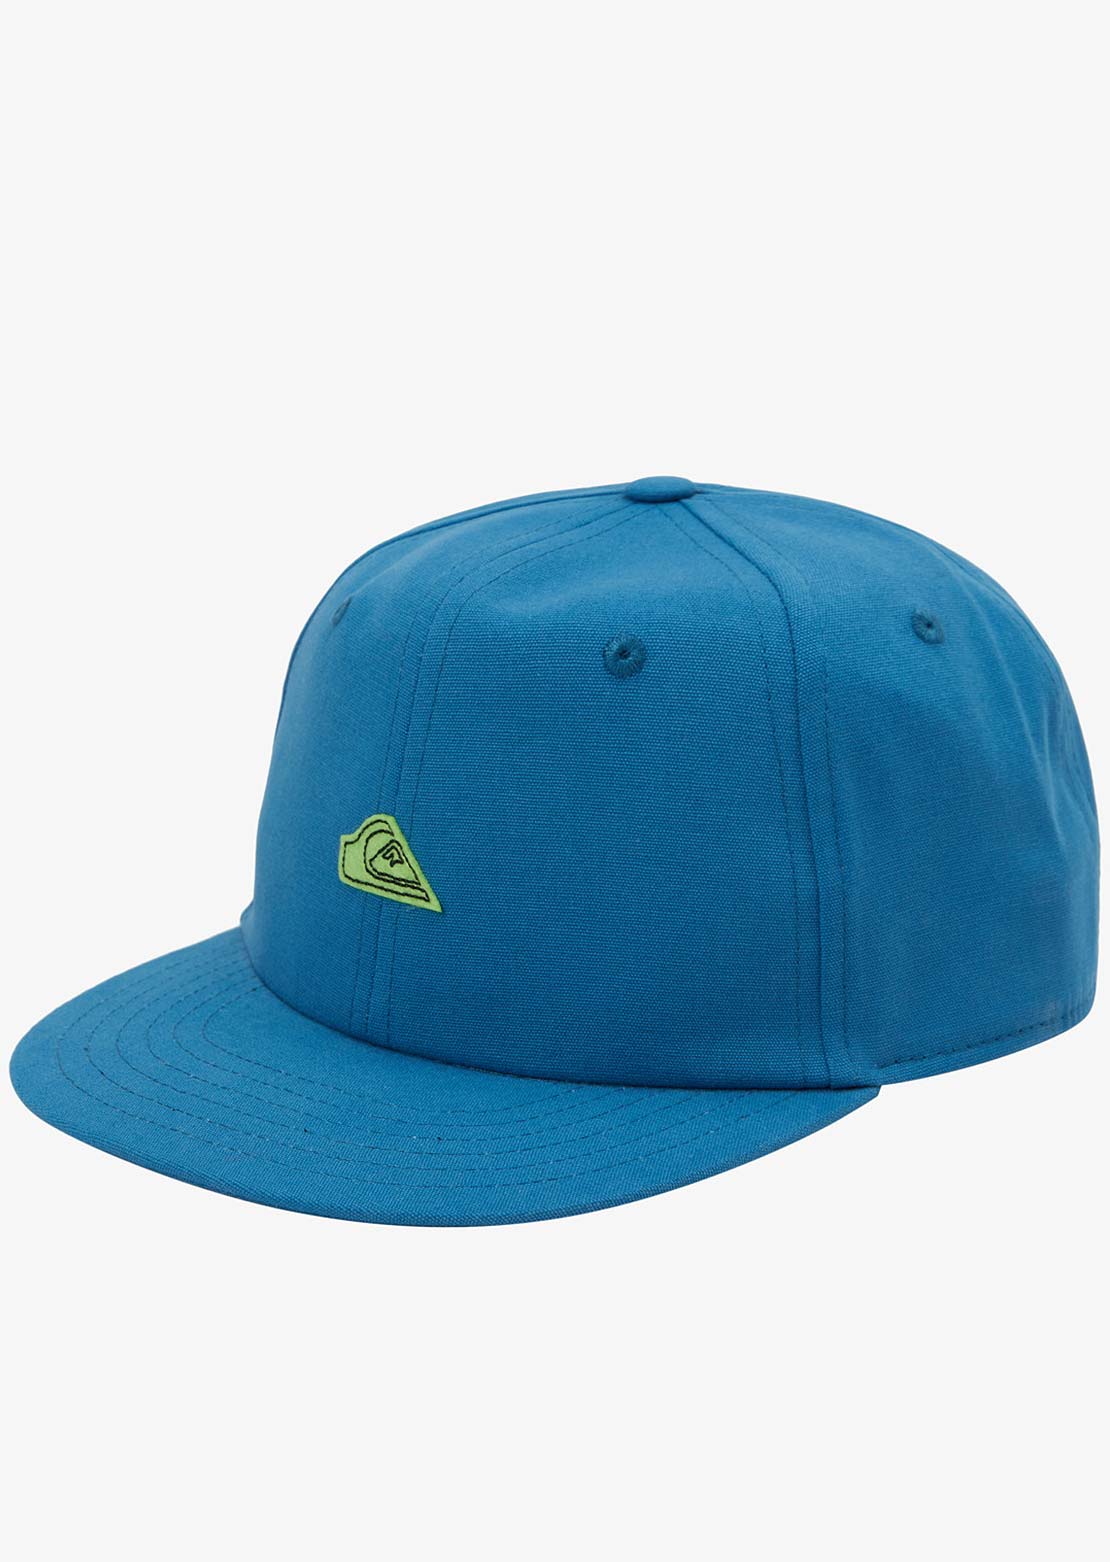 Quiksilver Junior Gassed Up Cap French Blue